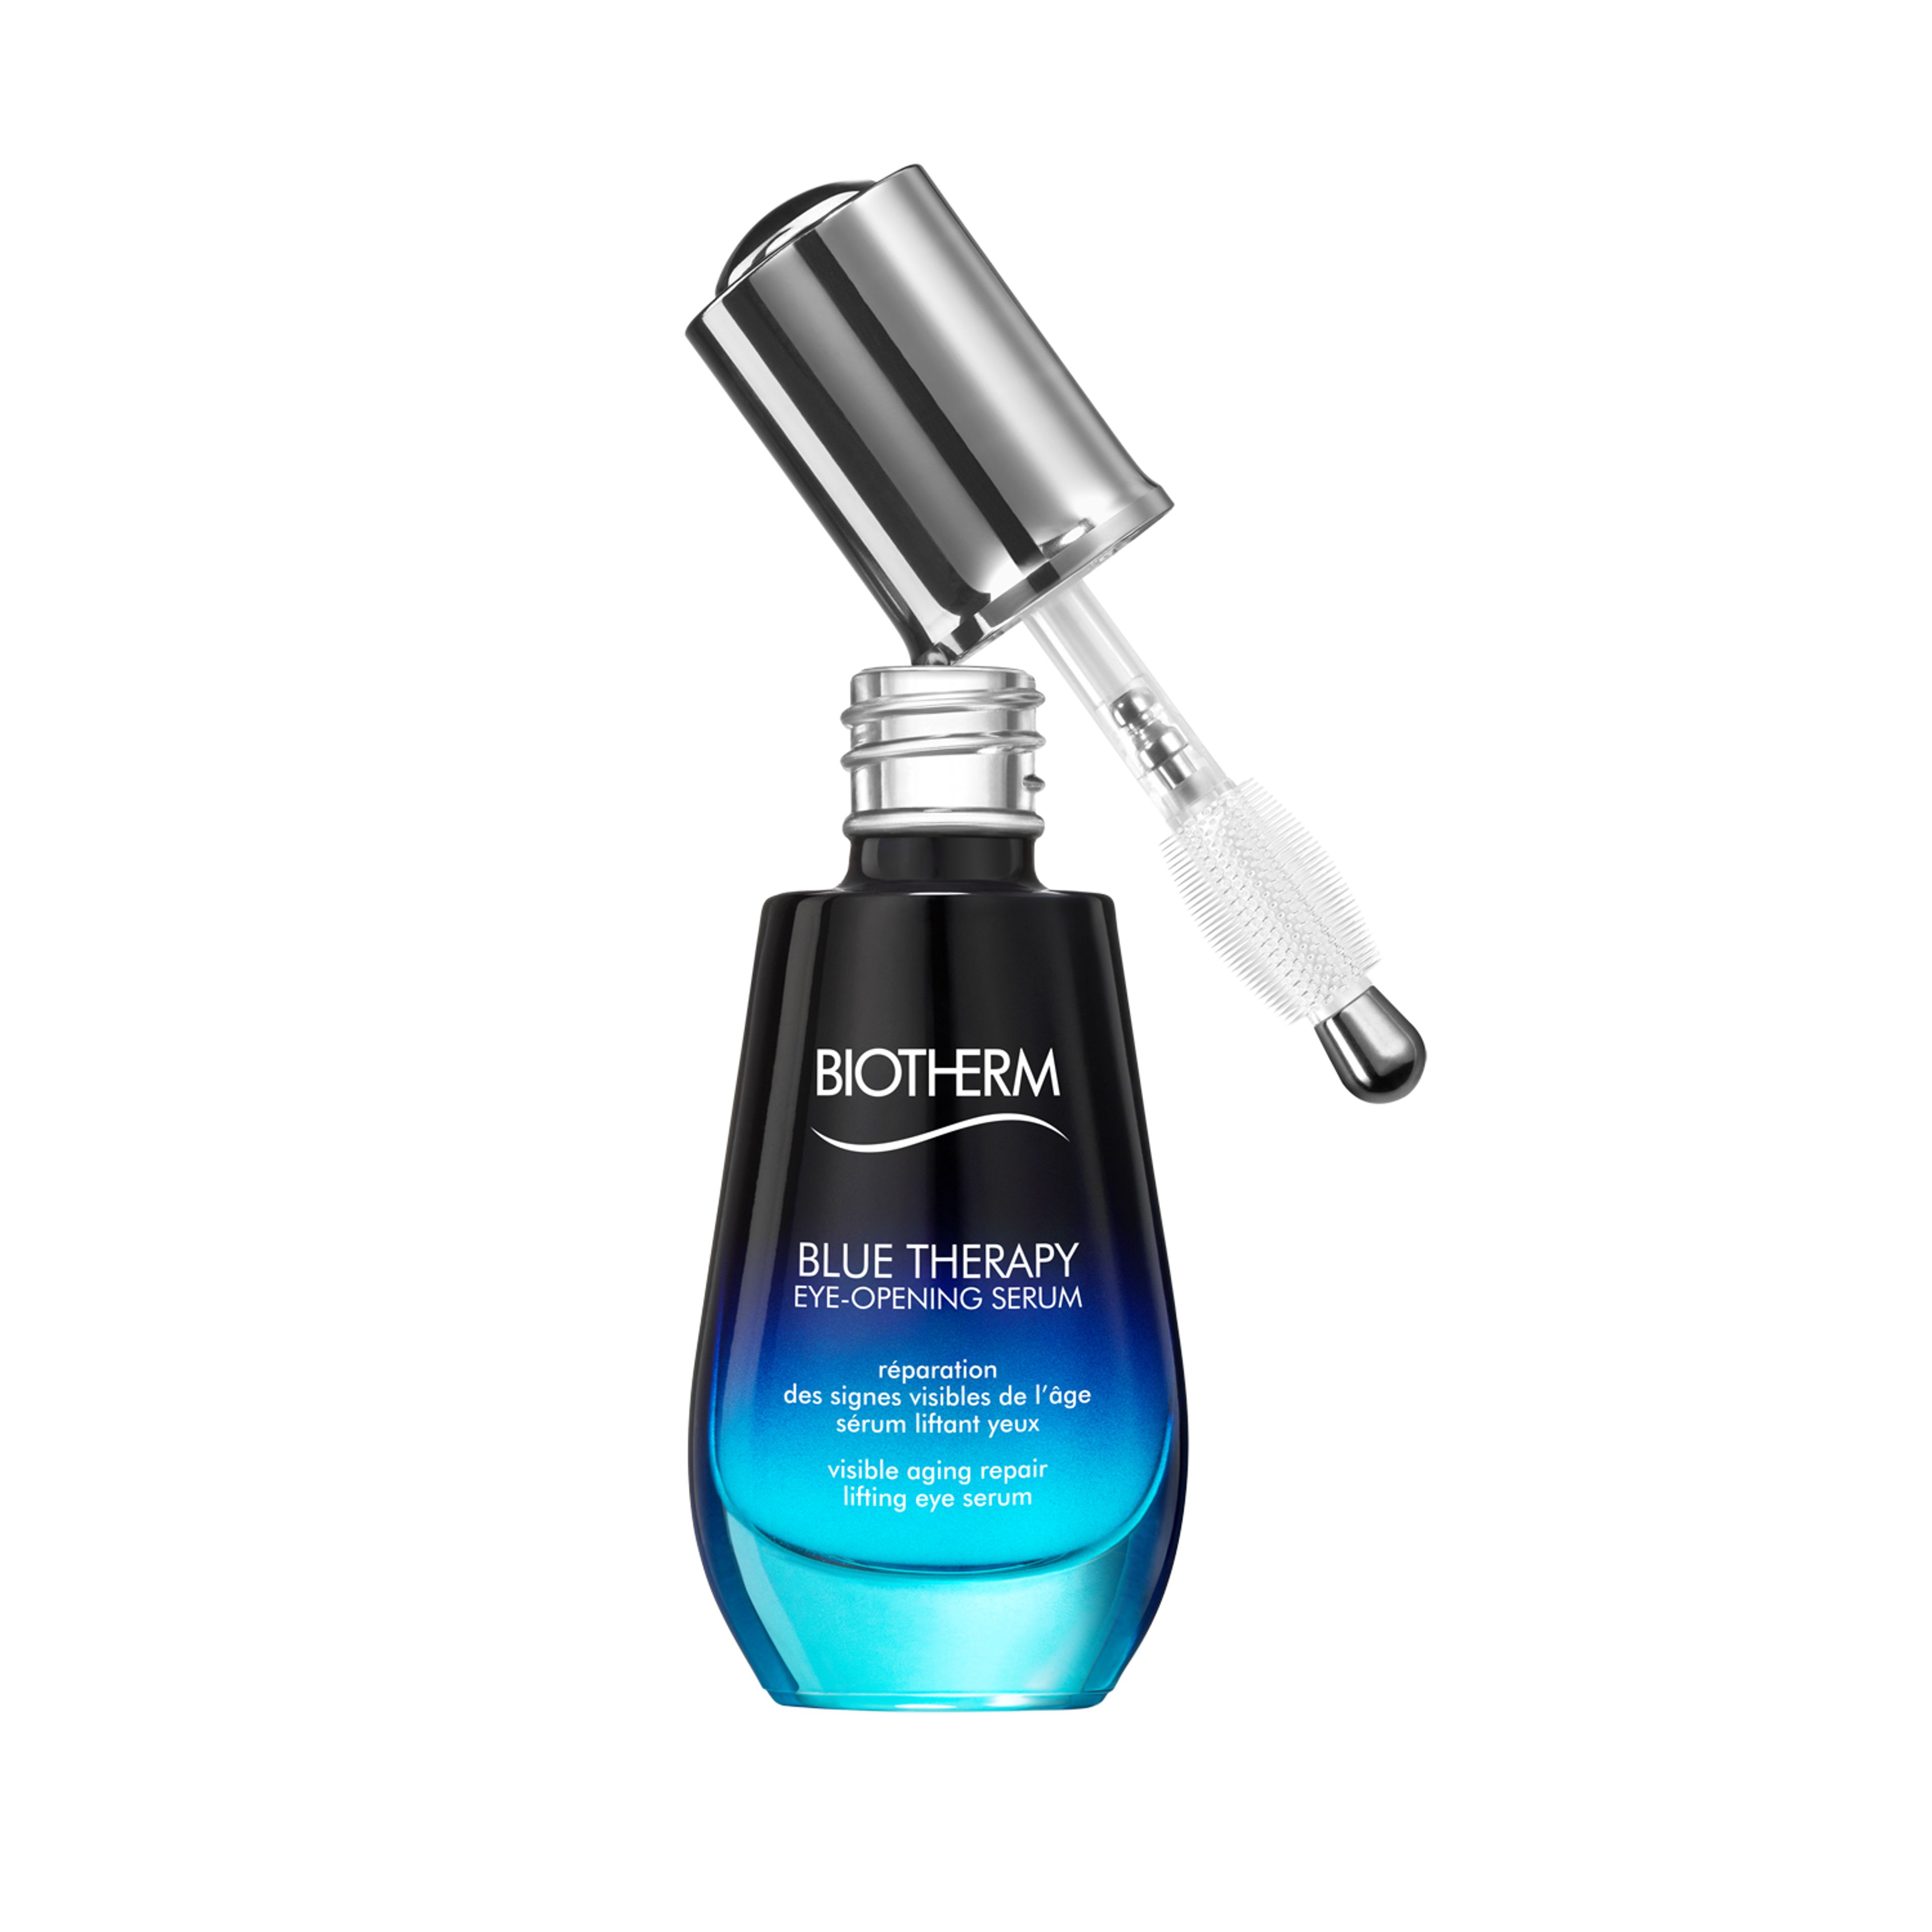 Biotherm Blue Therapy Eye-opening Serum 2